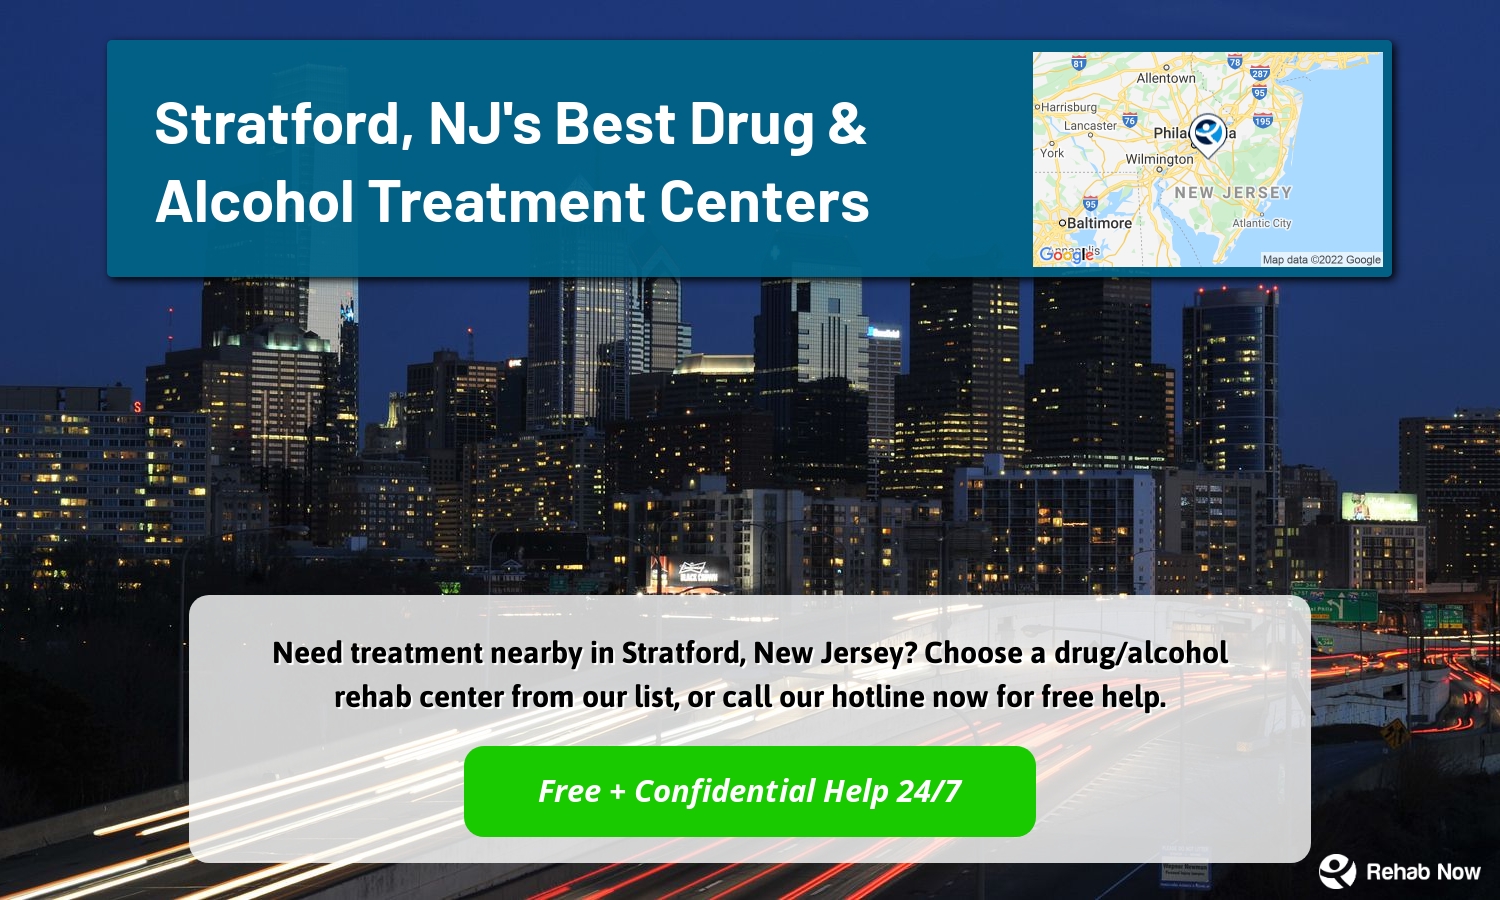 Need treatment nearby in Stratford, New Jersey? Choose a drug/alcohol rehab center from our list, or call our hotline now for free help.